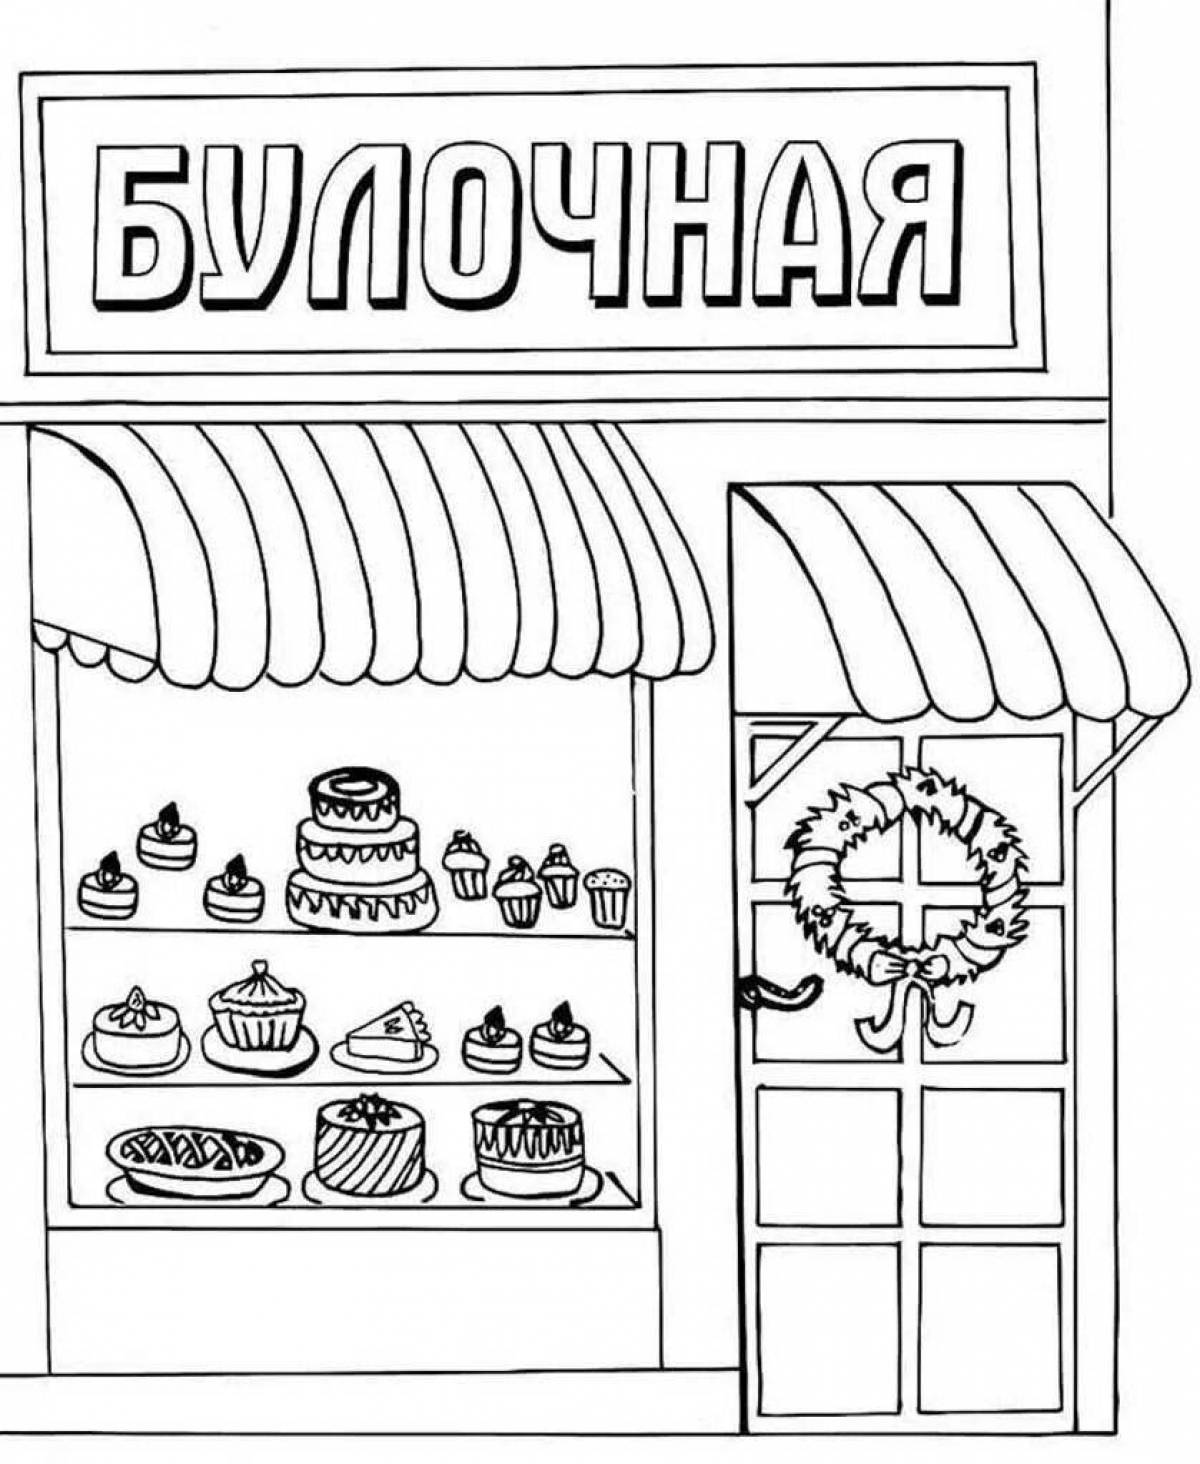 Serene coloring page kirov cafe